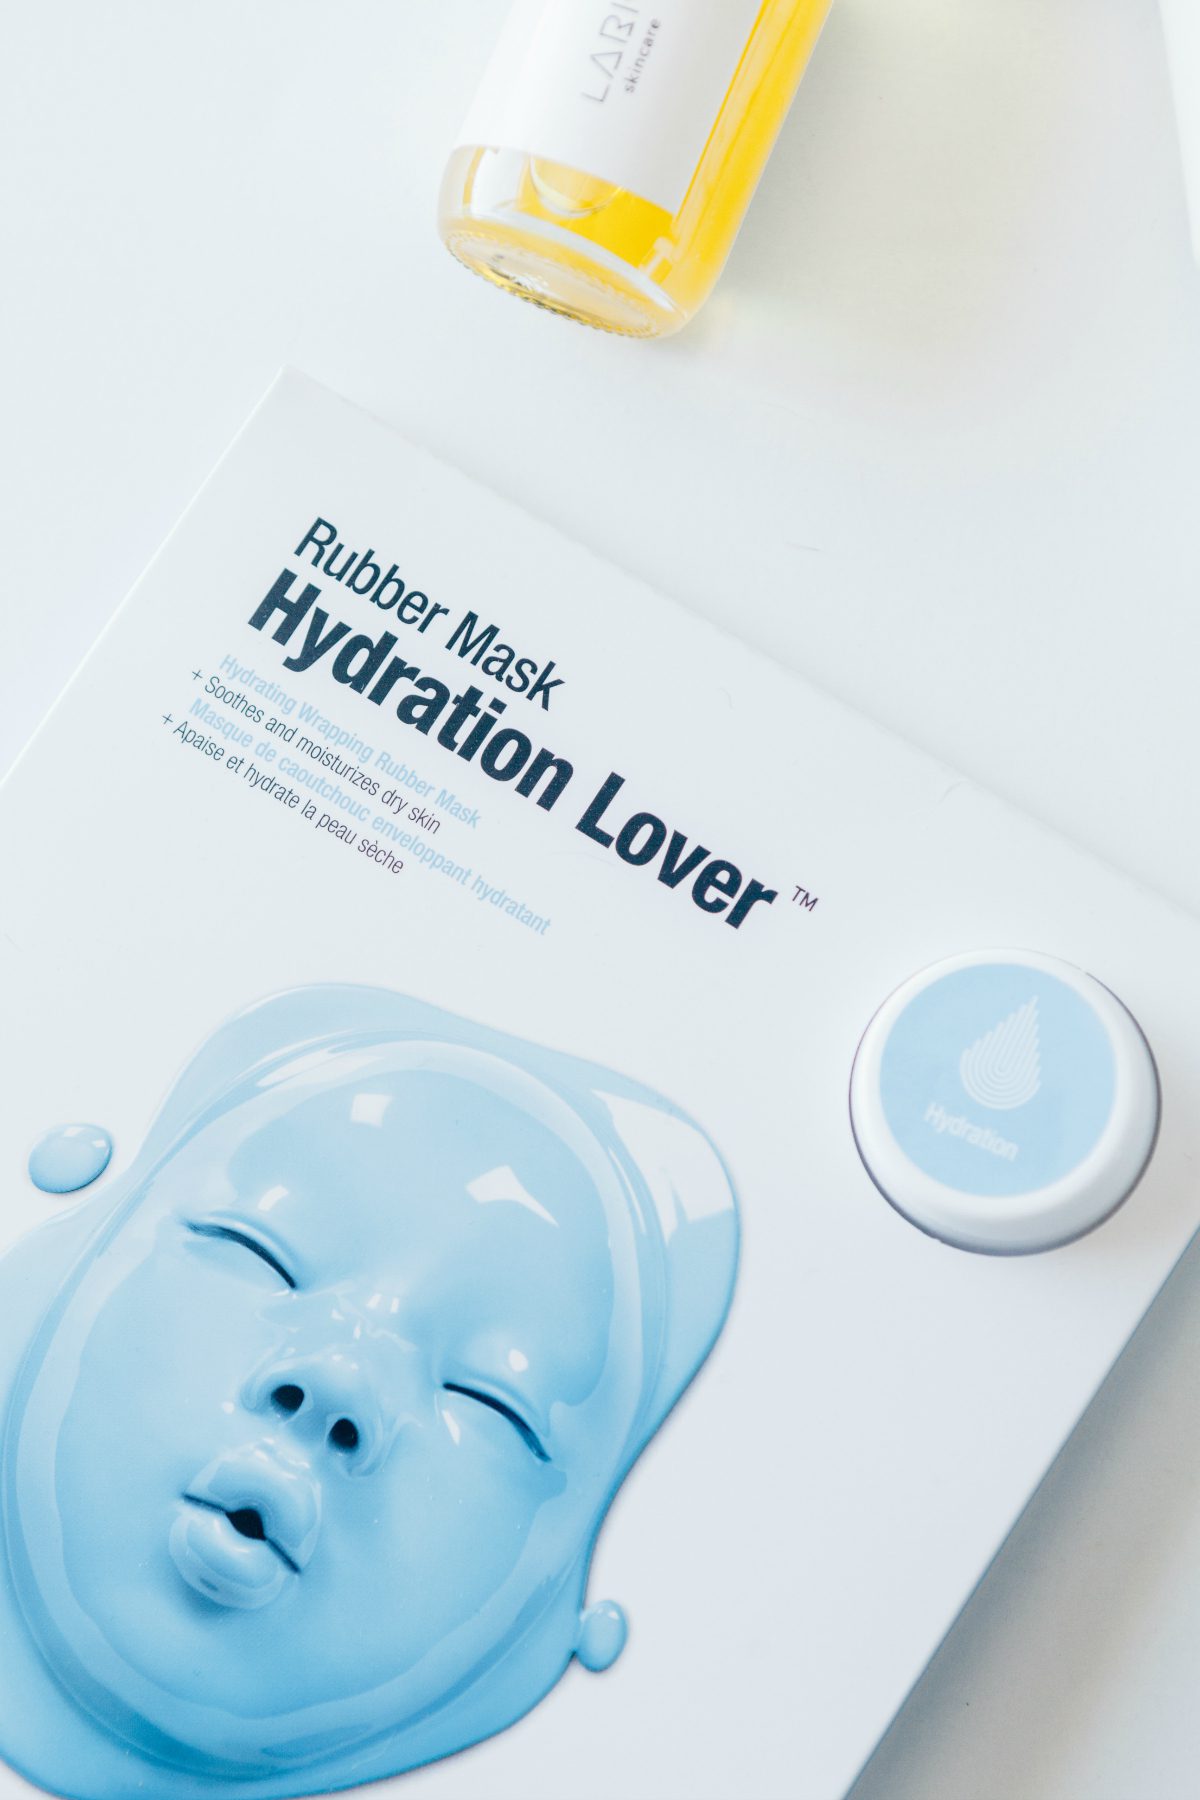 Dr. Jart Rubber Mask Hydration Lover one of the beauty products your mom will love